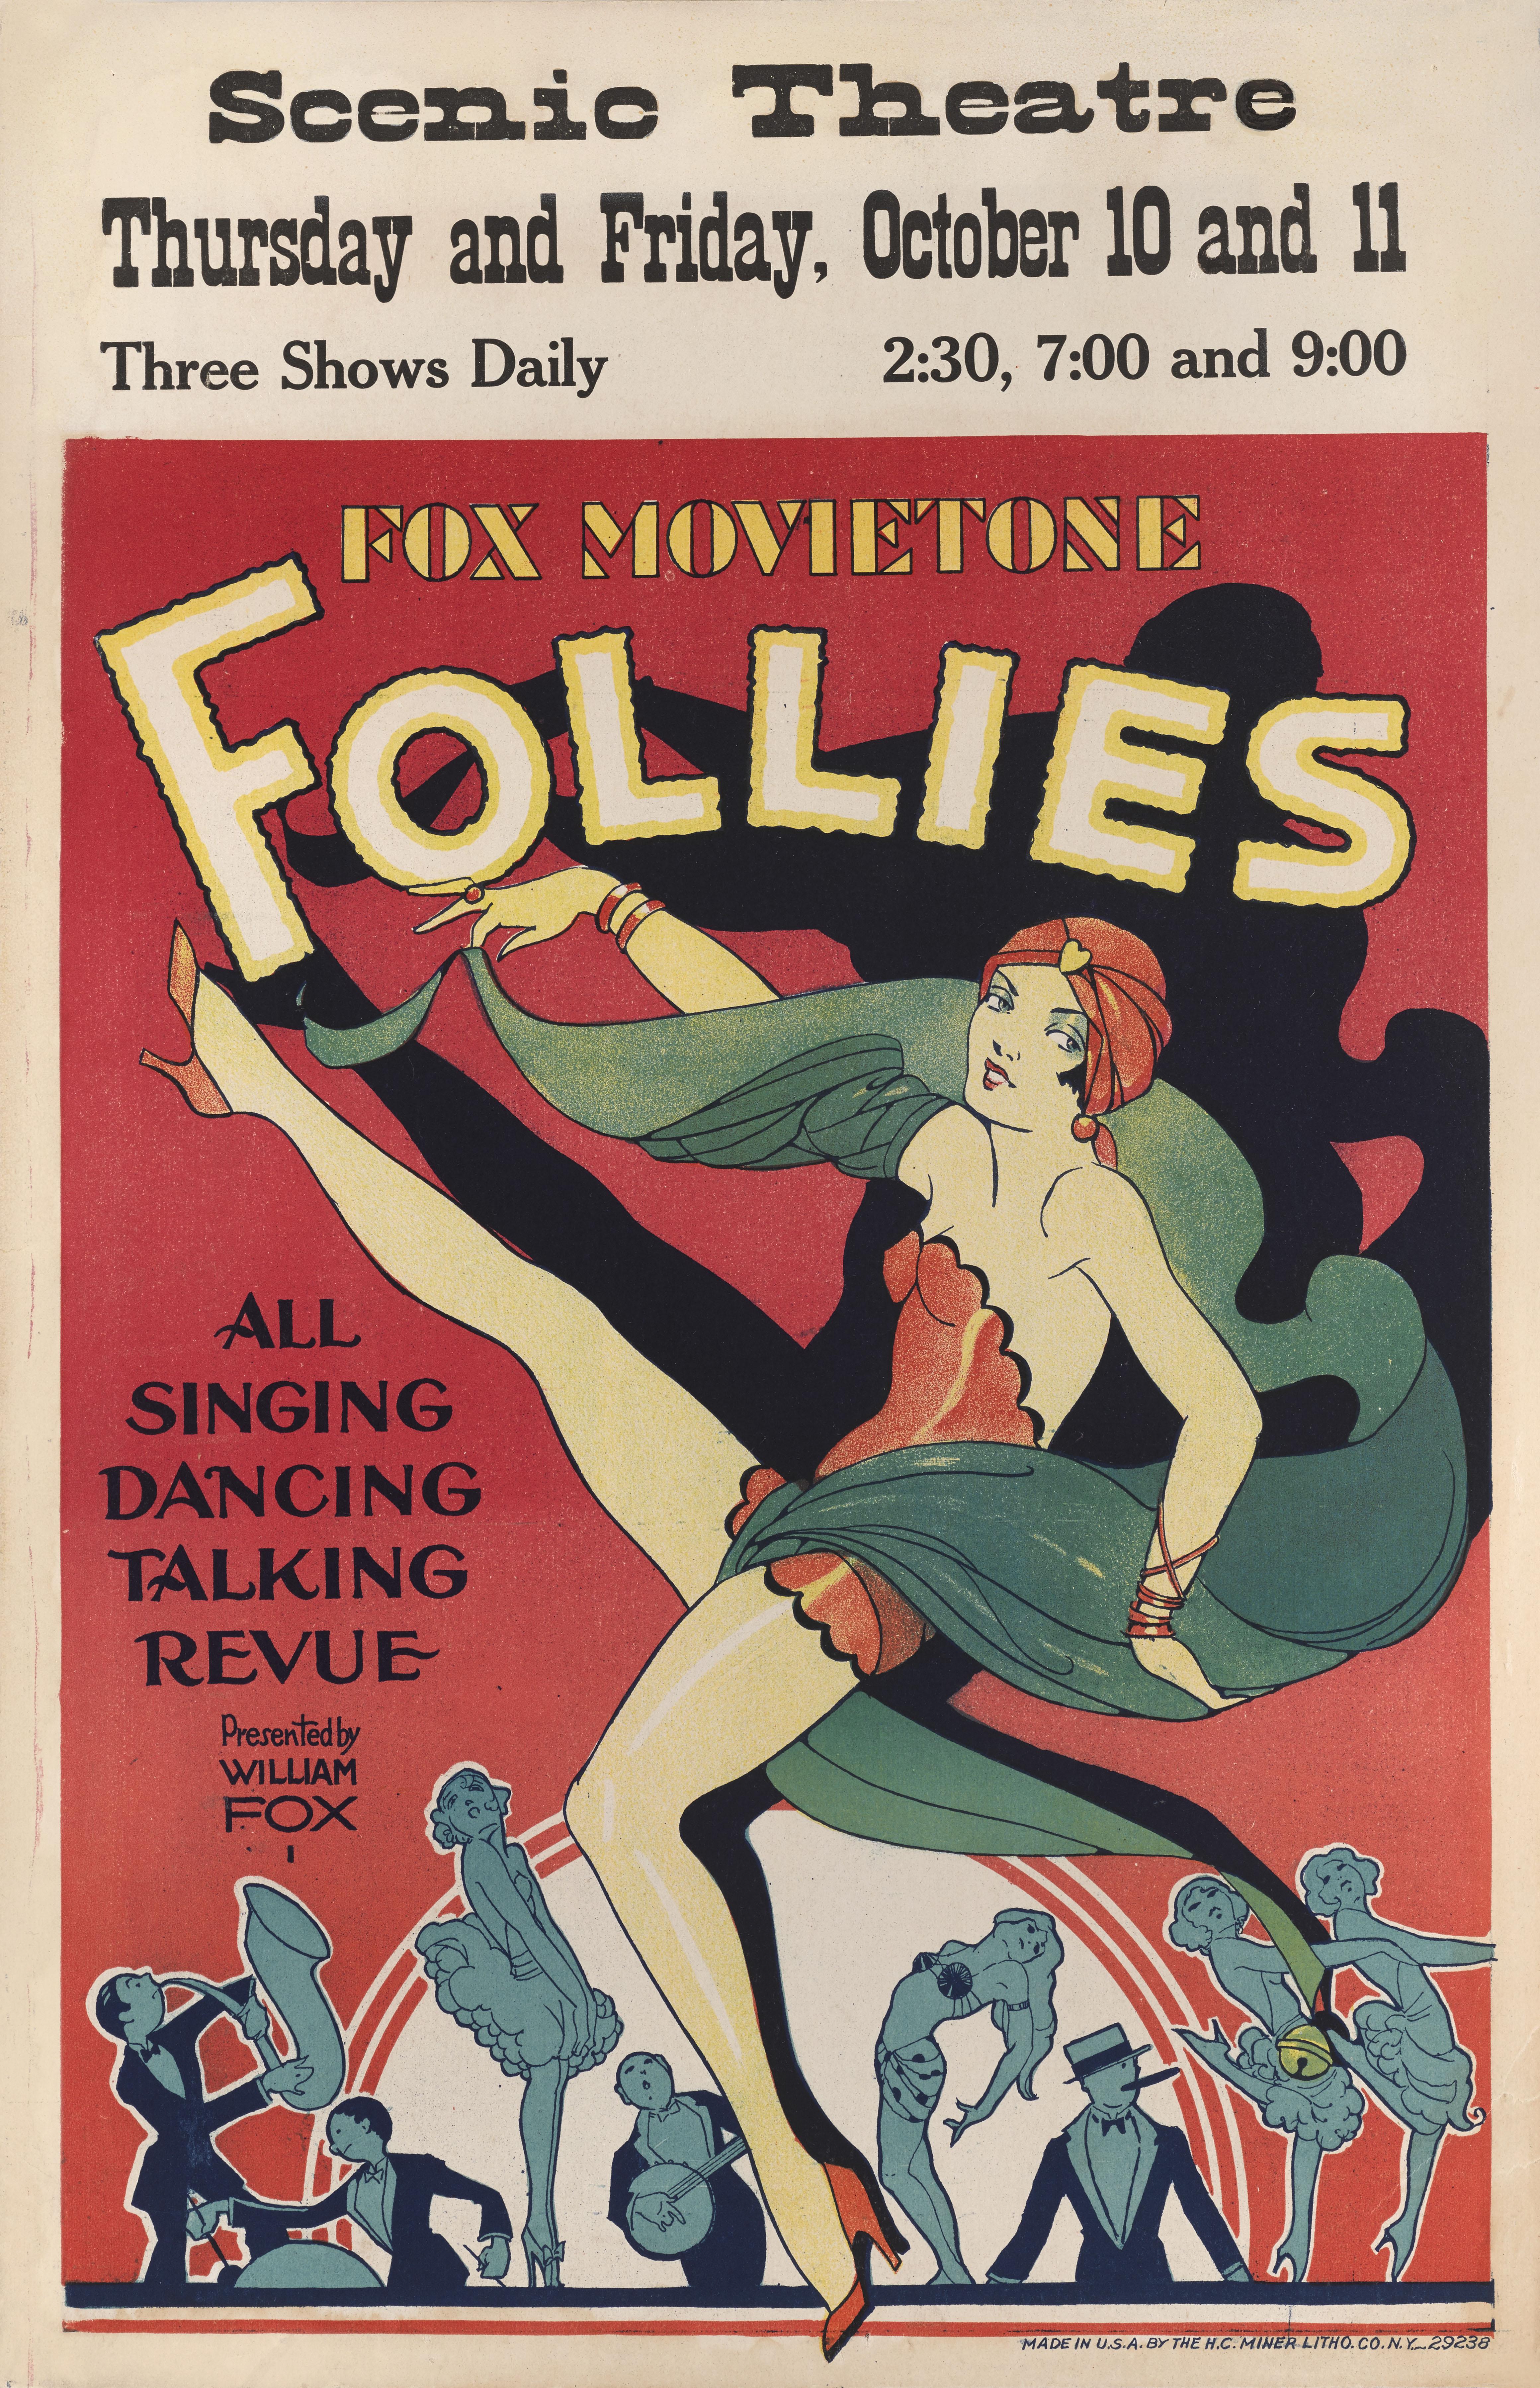 Original US film poster for the 1929 Comedy musical romance starring John Breeden, Lola Lane, DeWitt Jennings
This film was directed by David Butler
This poster is unfolded and conservation paper backed and would be shipped flat by Federal Express.